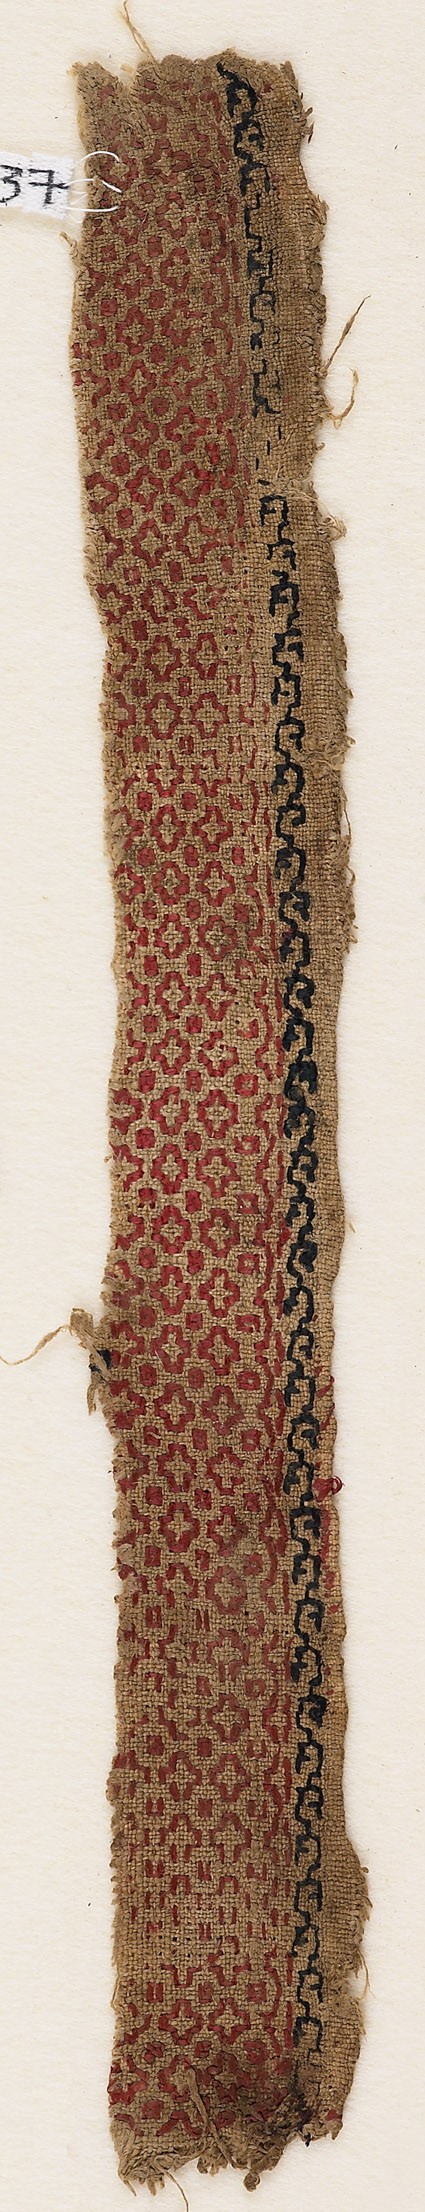 Textile fragment with cross-shaped diamonds and dotsfront